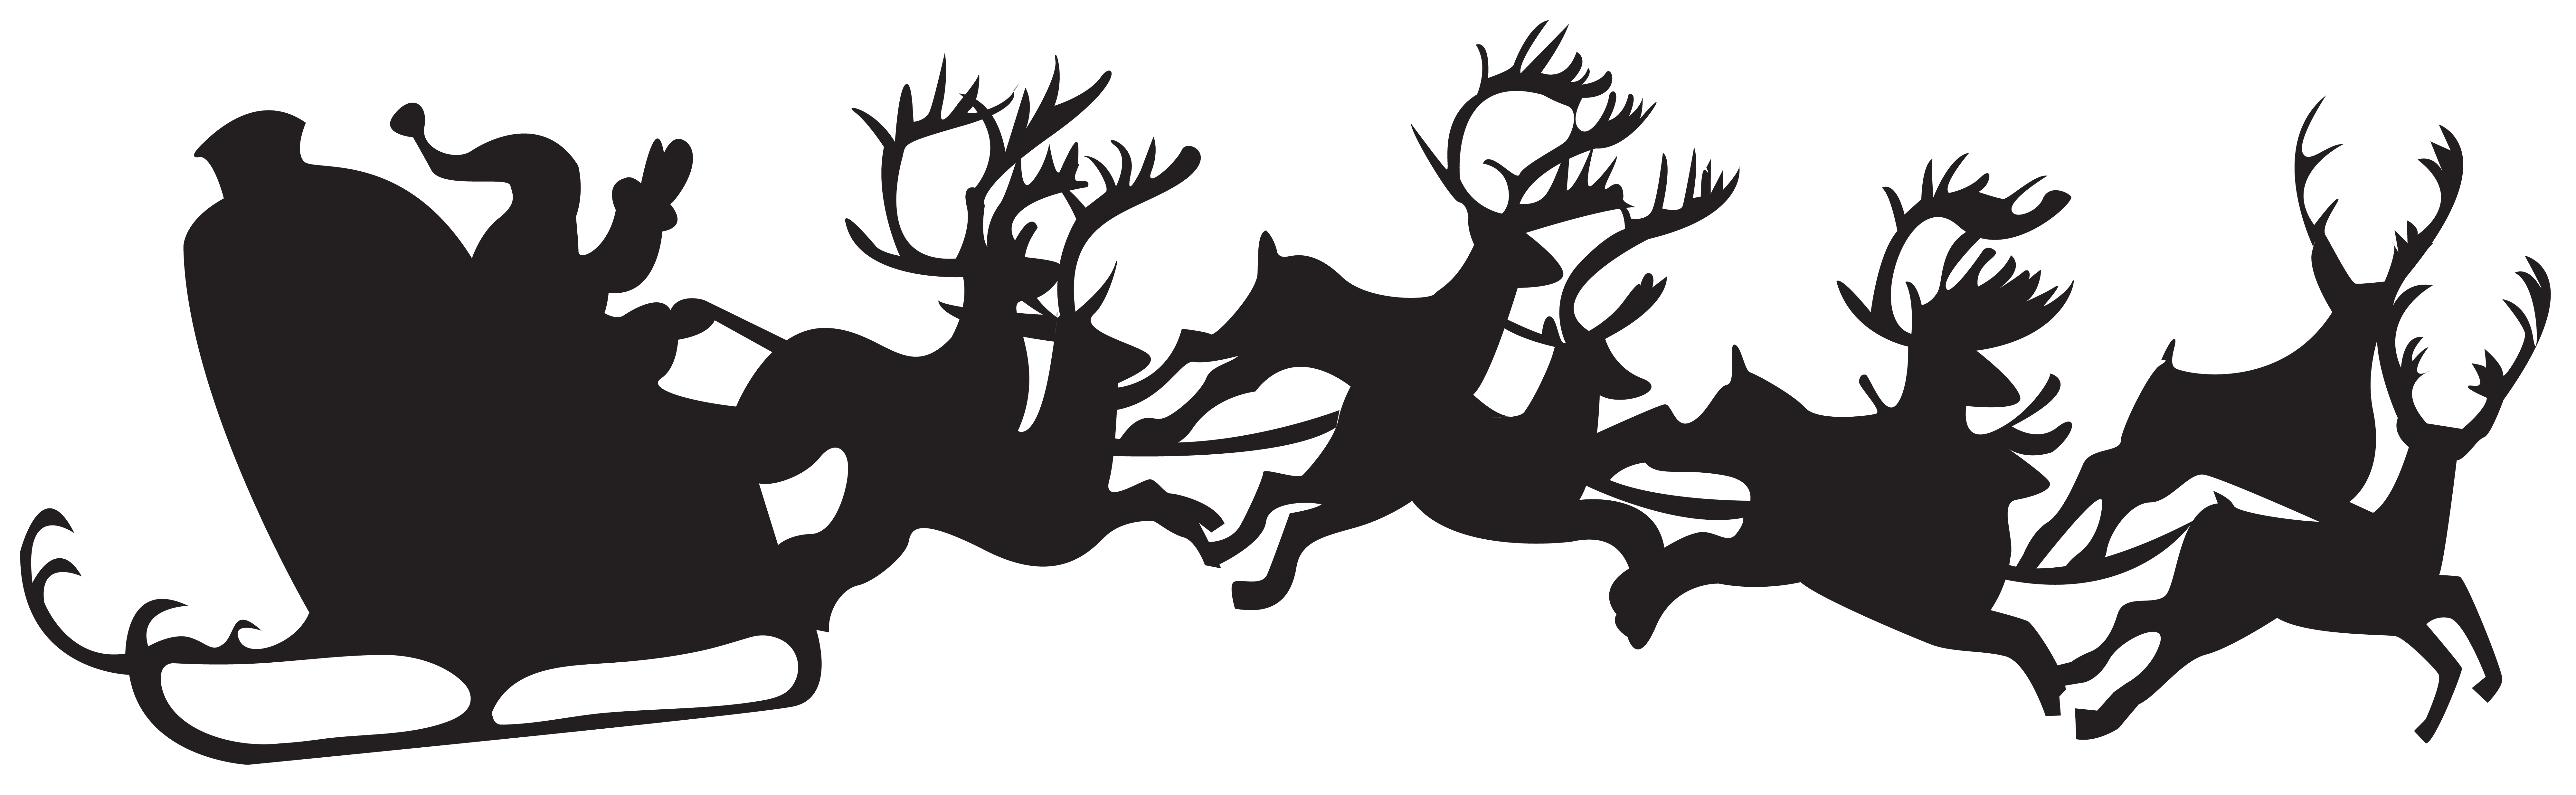 Silhouette santa claus with. Clipart reindeer baby boy christmas